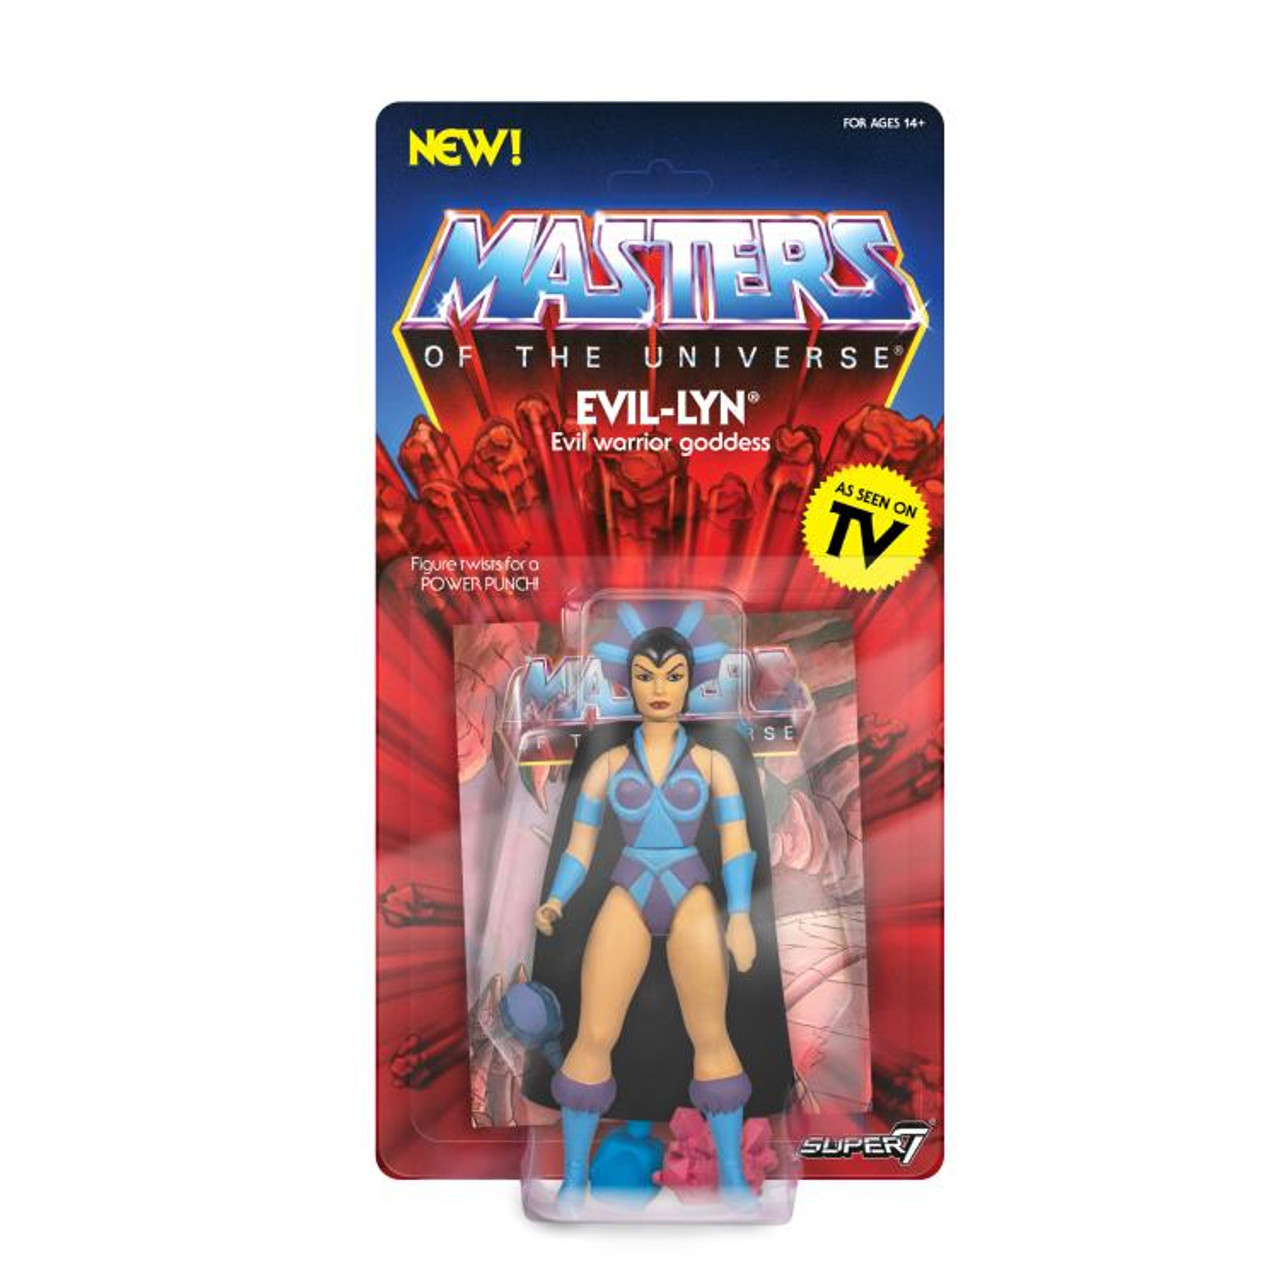 Action Figure Super 7 Masters of the Universe Evil-Lyn 5 1/2"